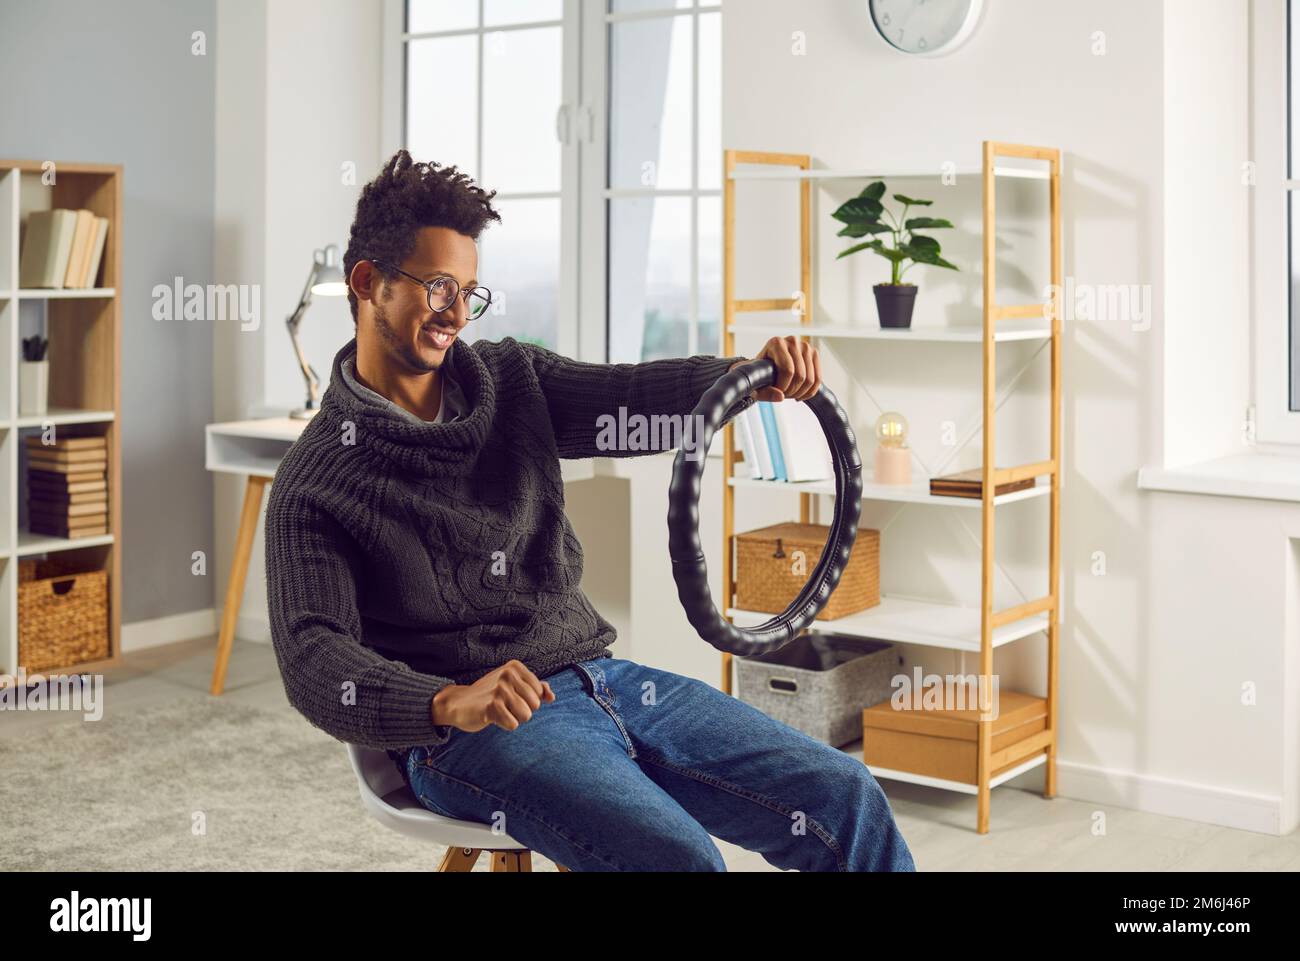 Funny, happy man sitting on a chair at home and pretending to drive an invisible car Stock Photo